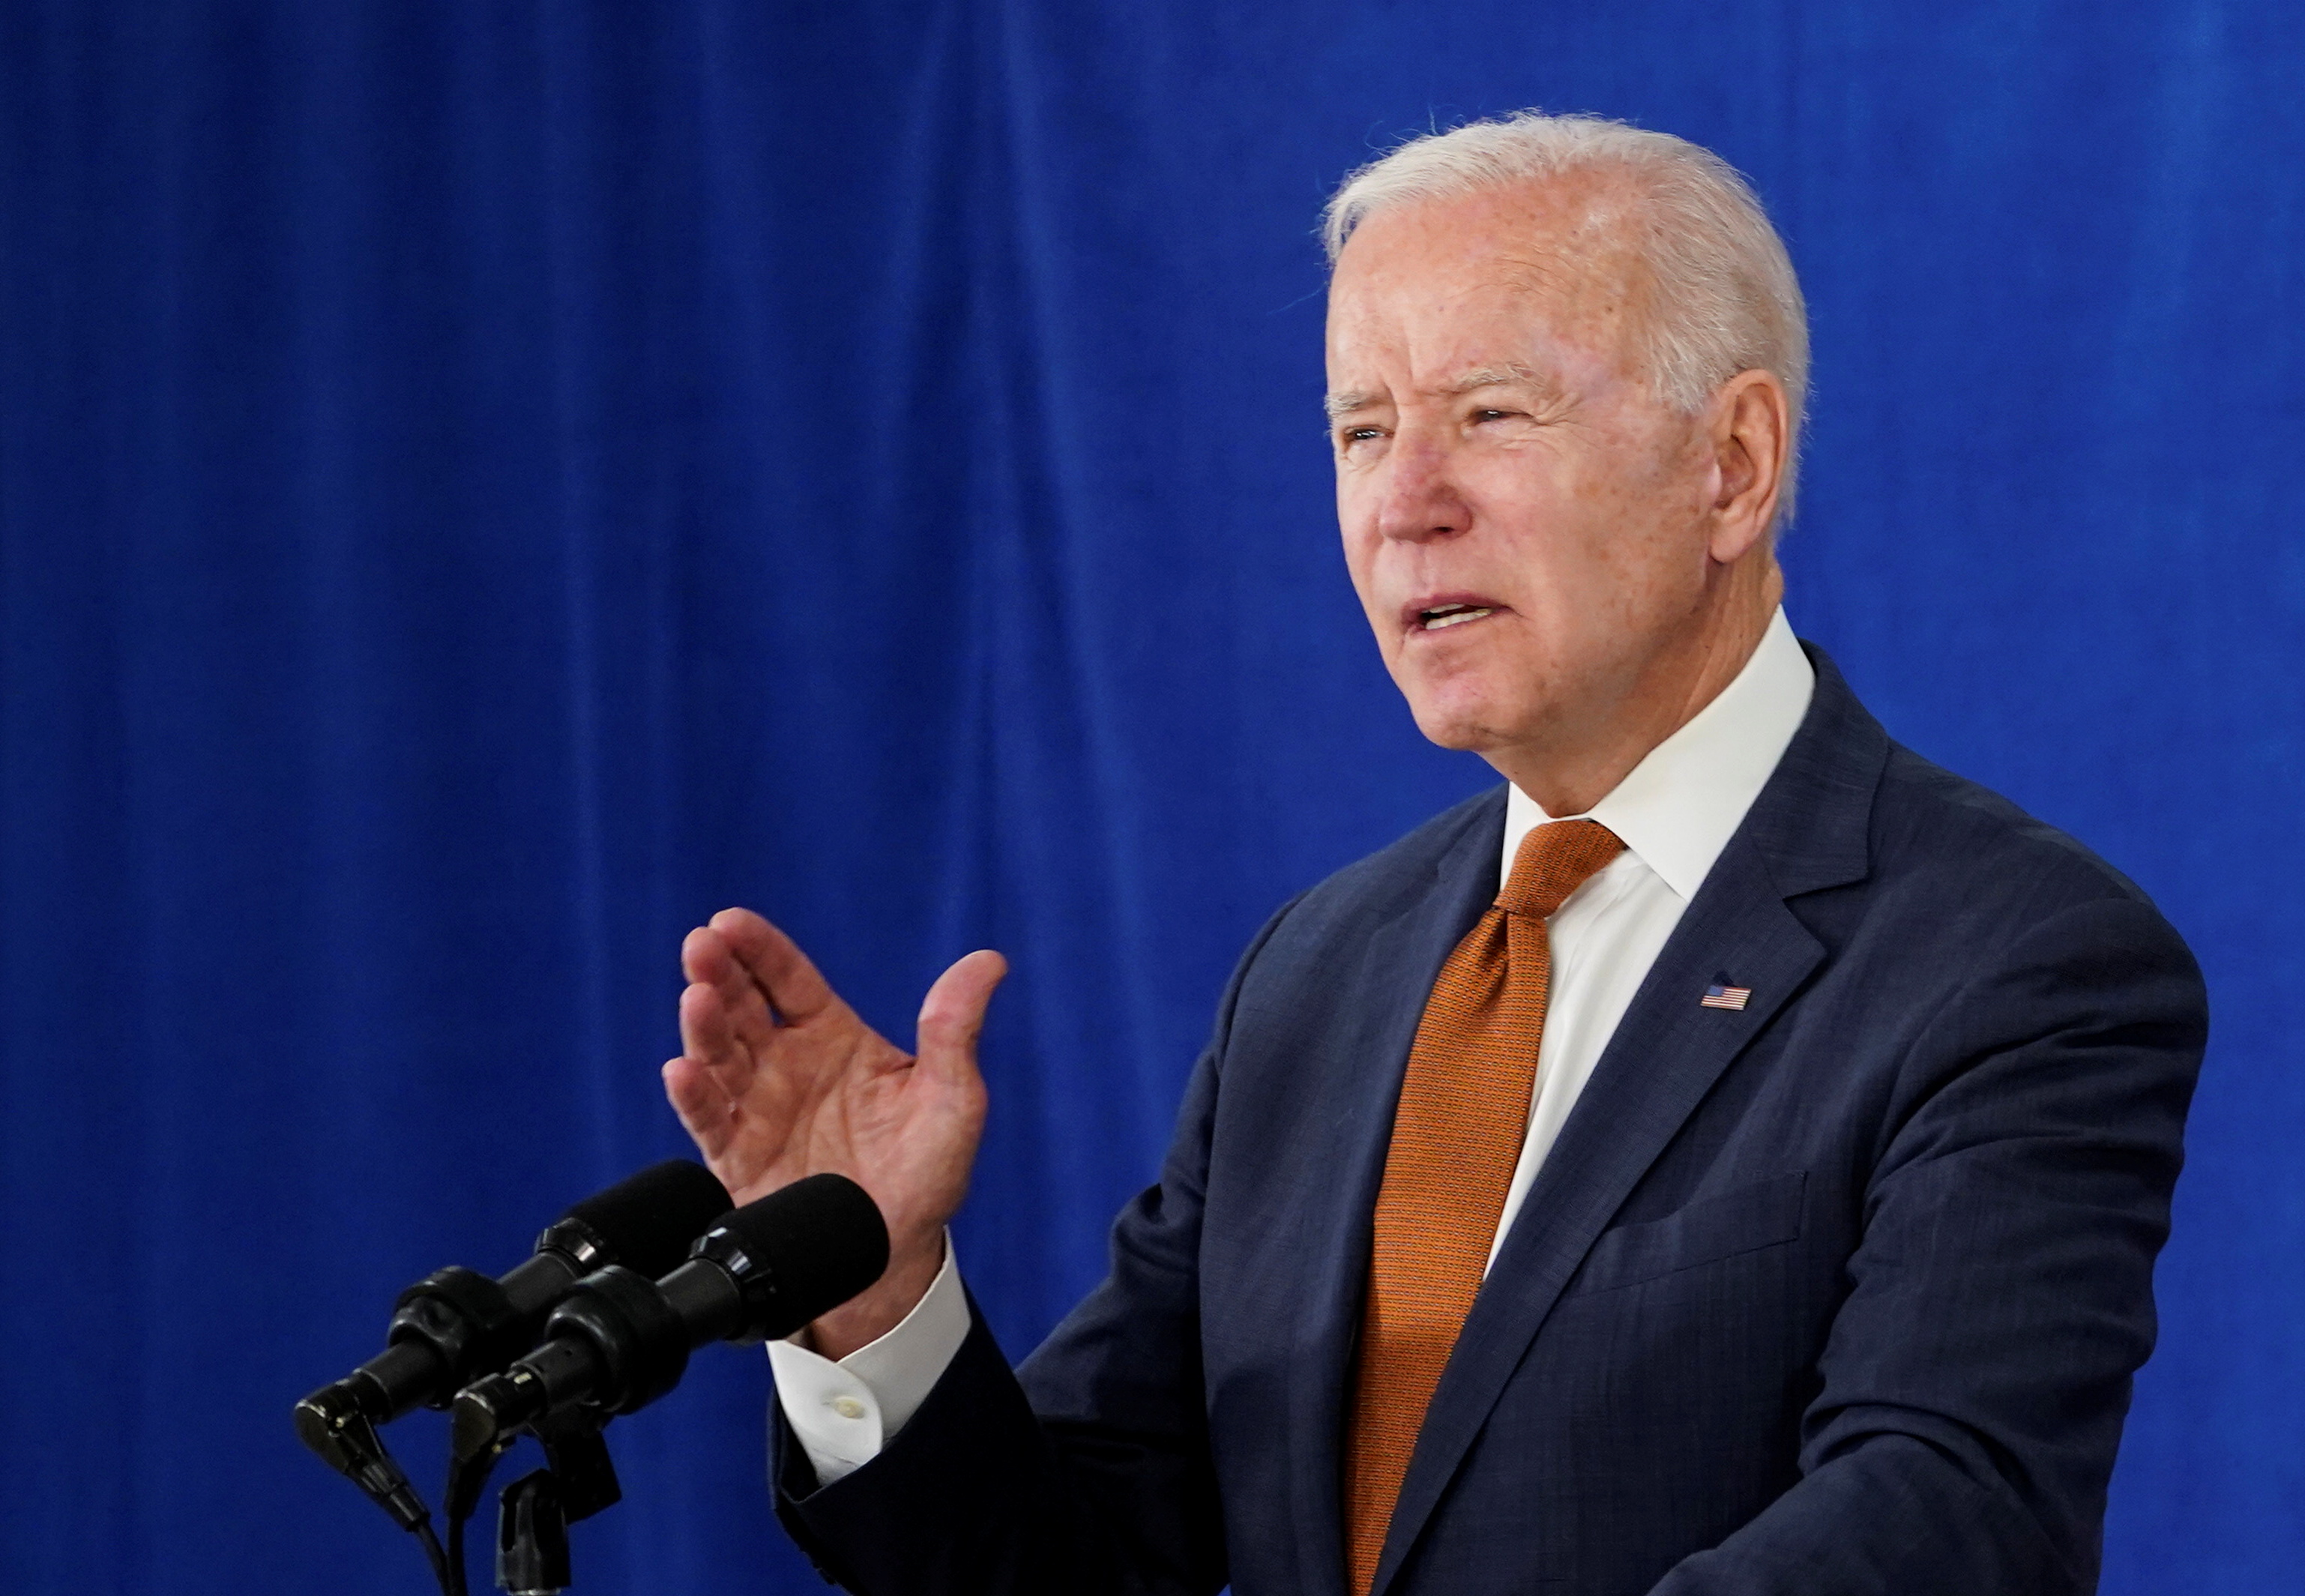 U.S. President Joe Biden delivers remarks on the May jobs report after U.S. employers boosted hiring amid the easing coronavirus disease (COVID-19) pandemic, at the Rehoboth Beach Convention Center in Rehoboth Beach, Delaware, U.S., June 4, 2021. REUTERS/Kevin Lamarque